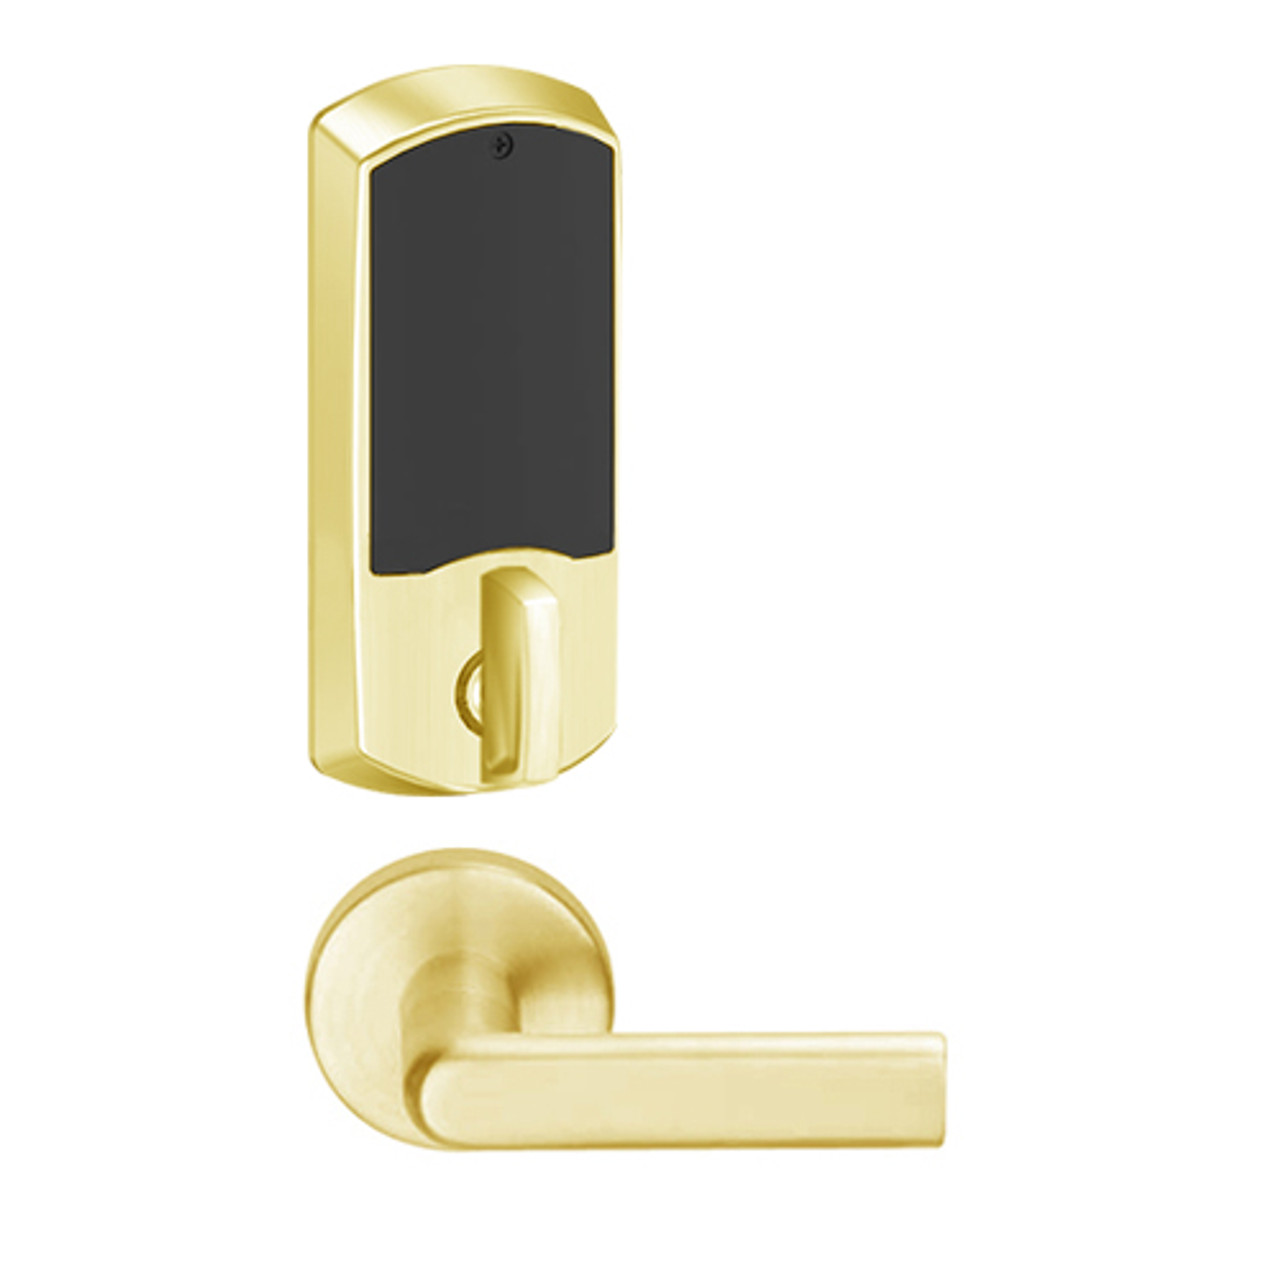 LEMD-GRW-J-01-605-00B Schlage Privacy/Apartment Wireless Greenwich Mortise Deadbolt Lock with LED and 01 Lever Prepped for FSIC in Bright Brass